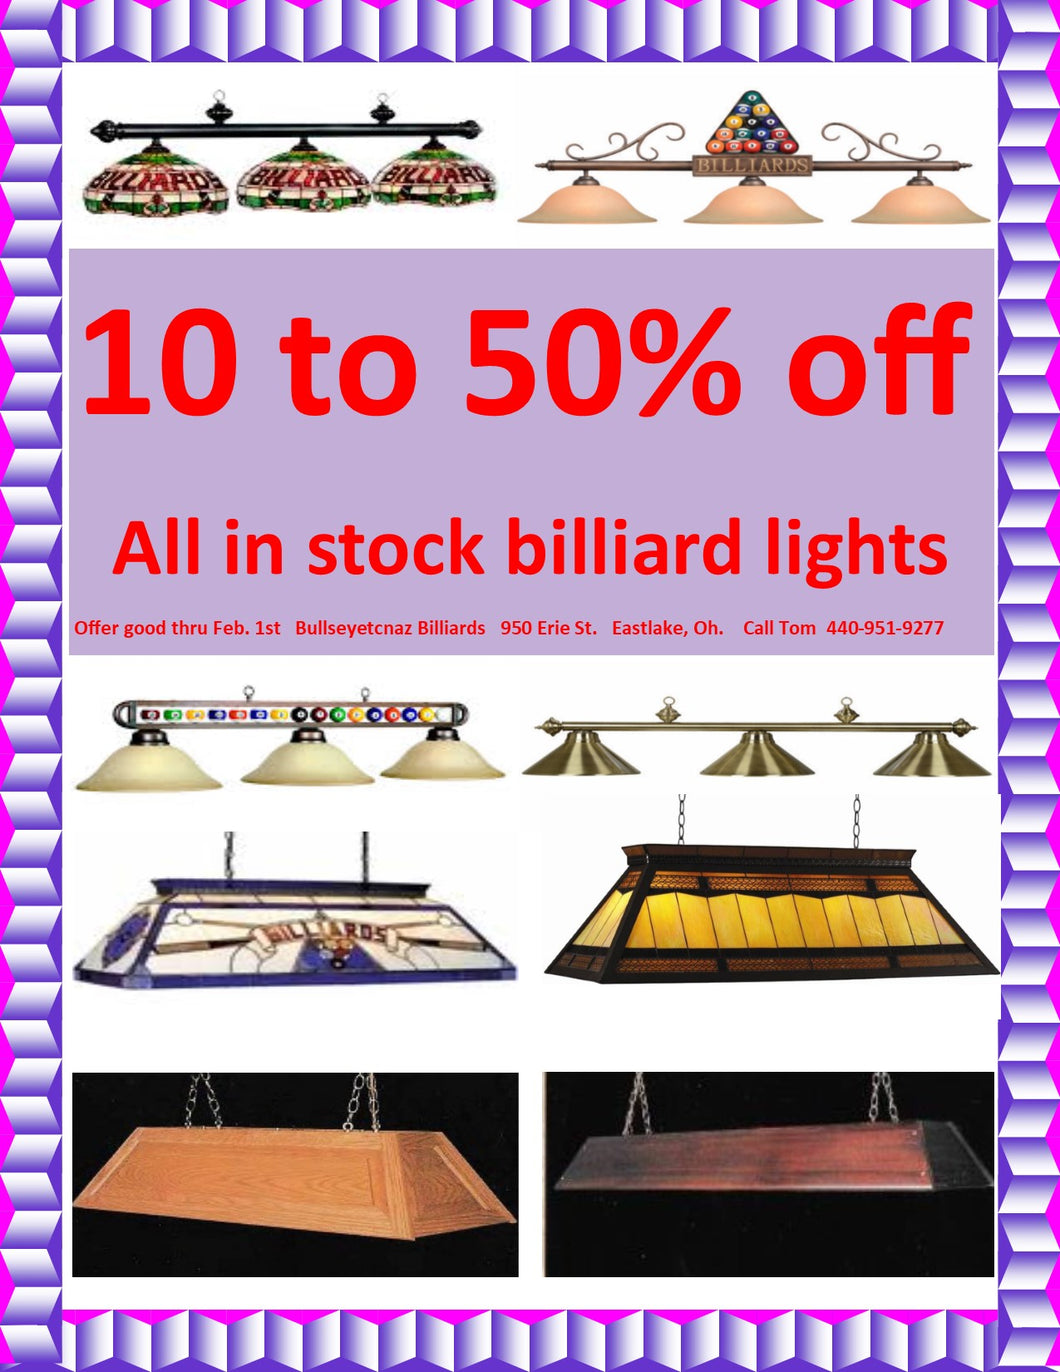 10% to 50% off all in stock billiard lights.